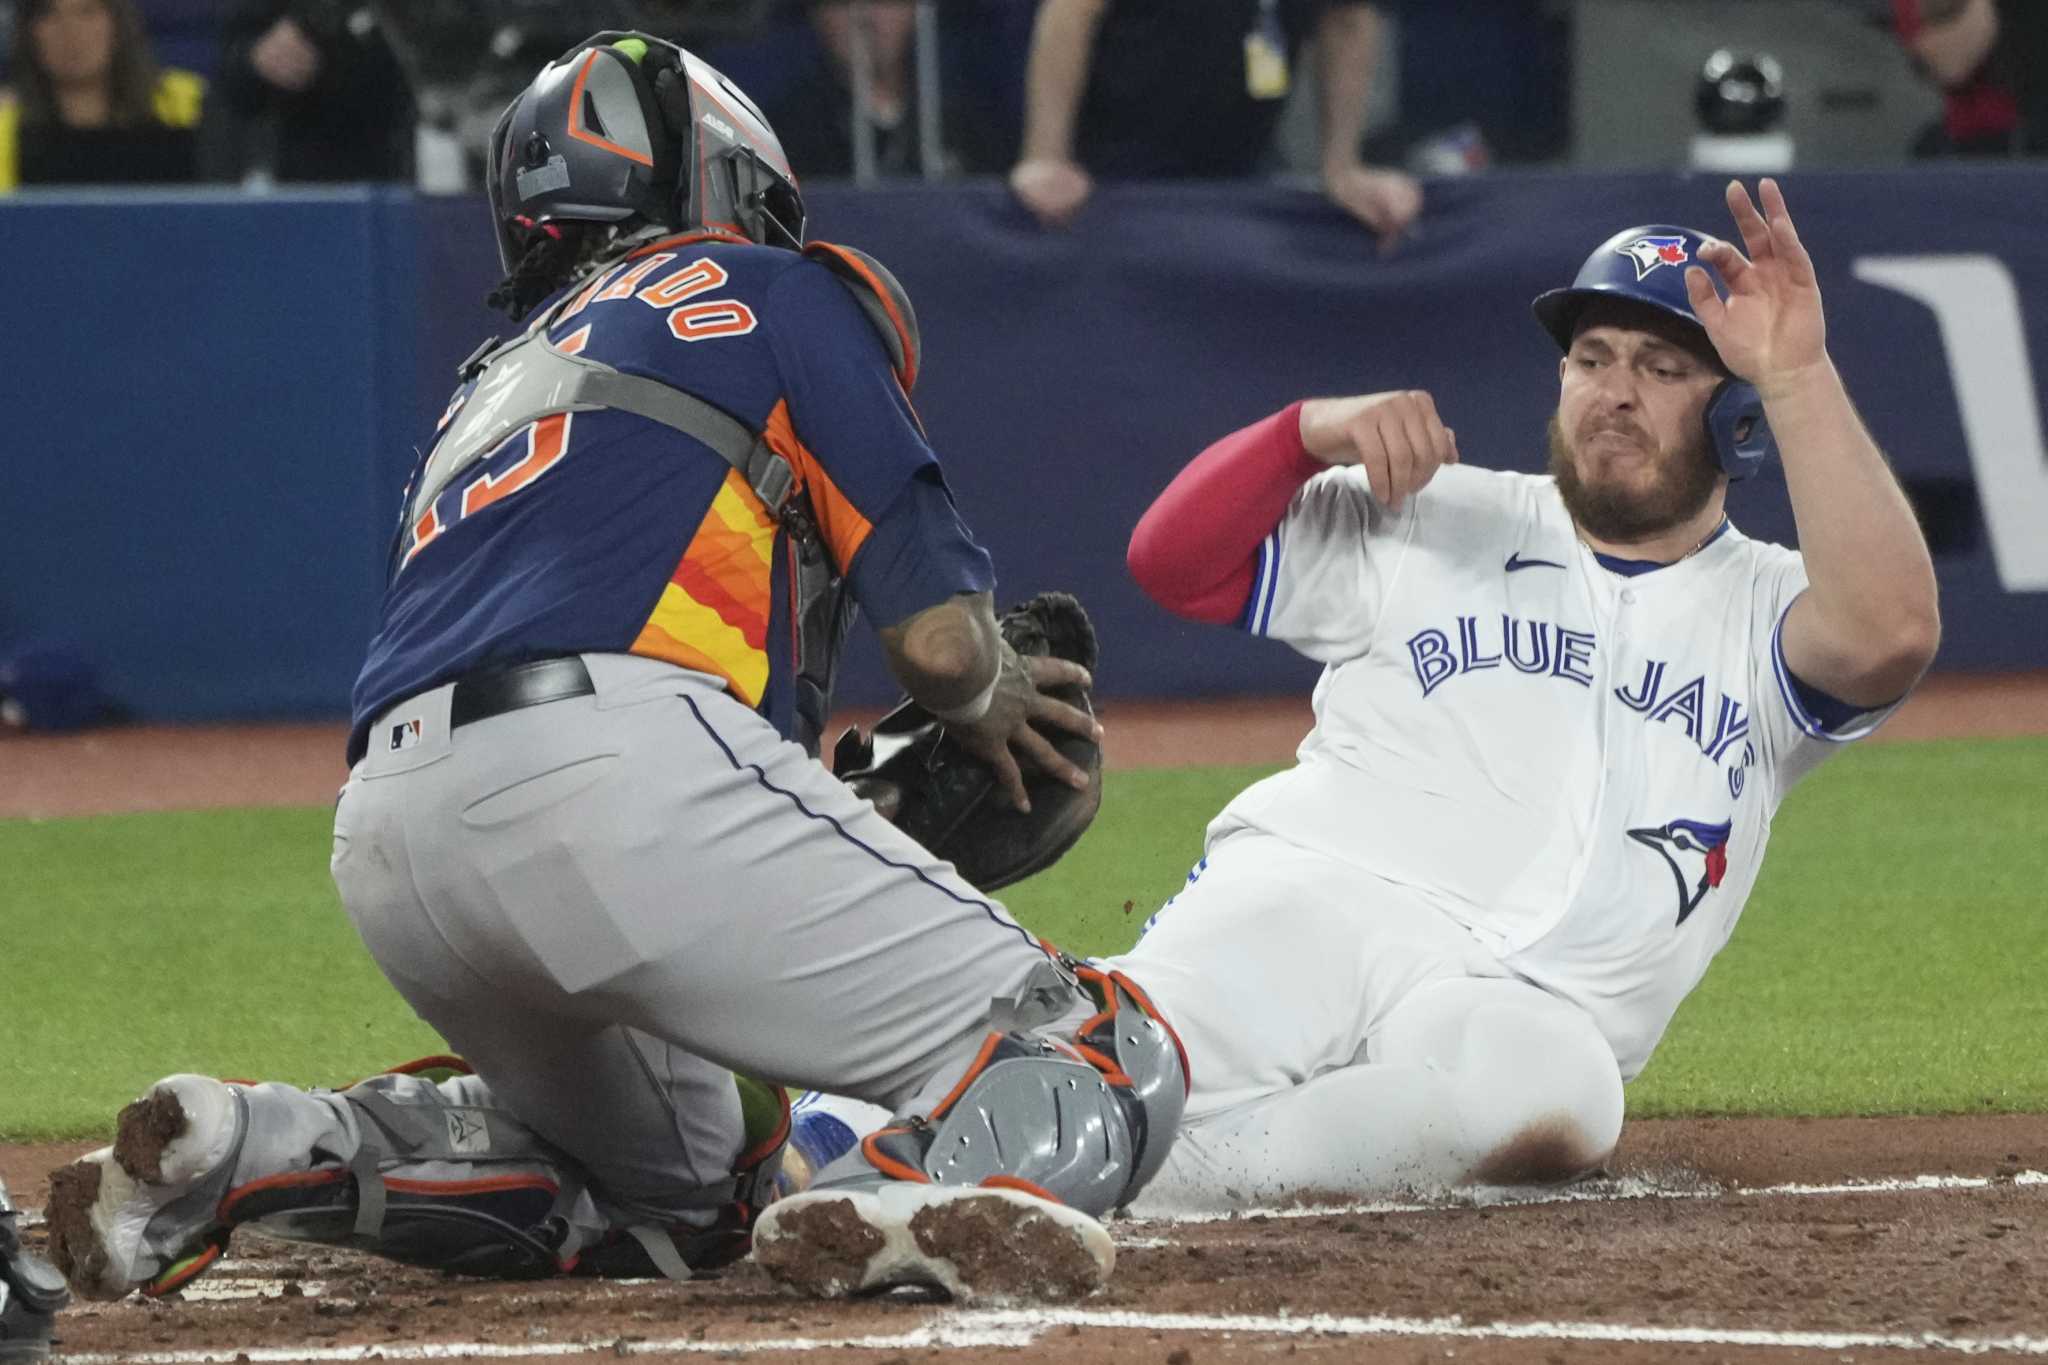 Blue Jays 3, Astros 2: Offense quiet again in third straight loss